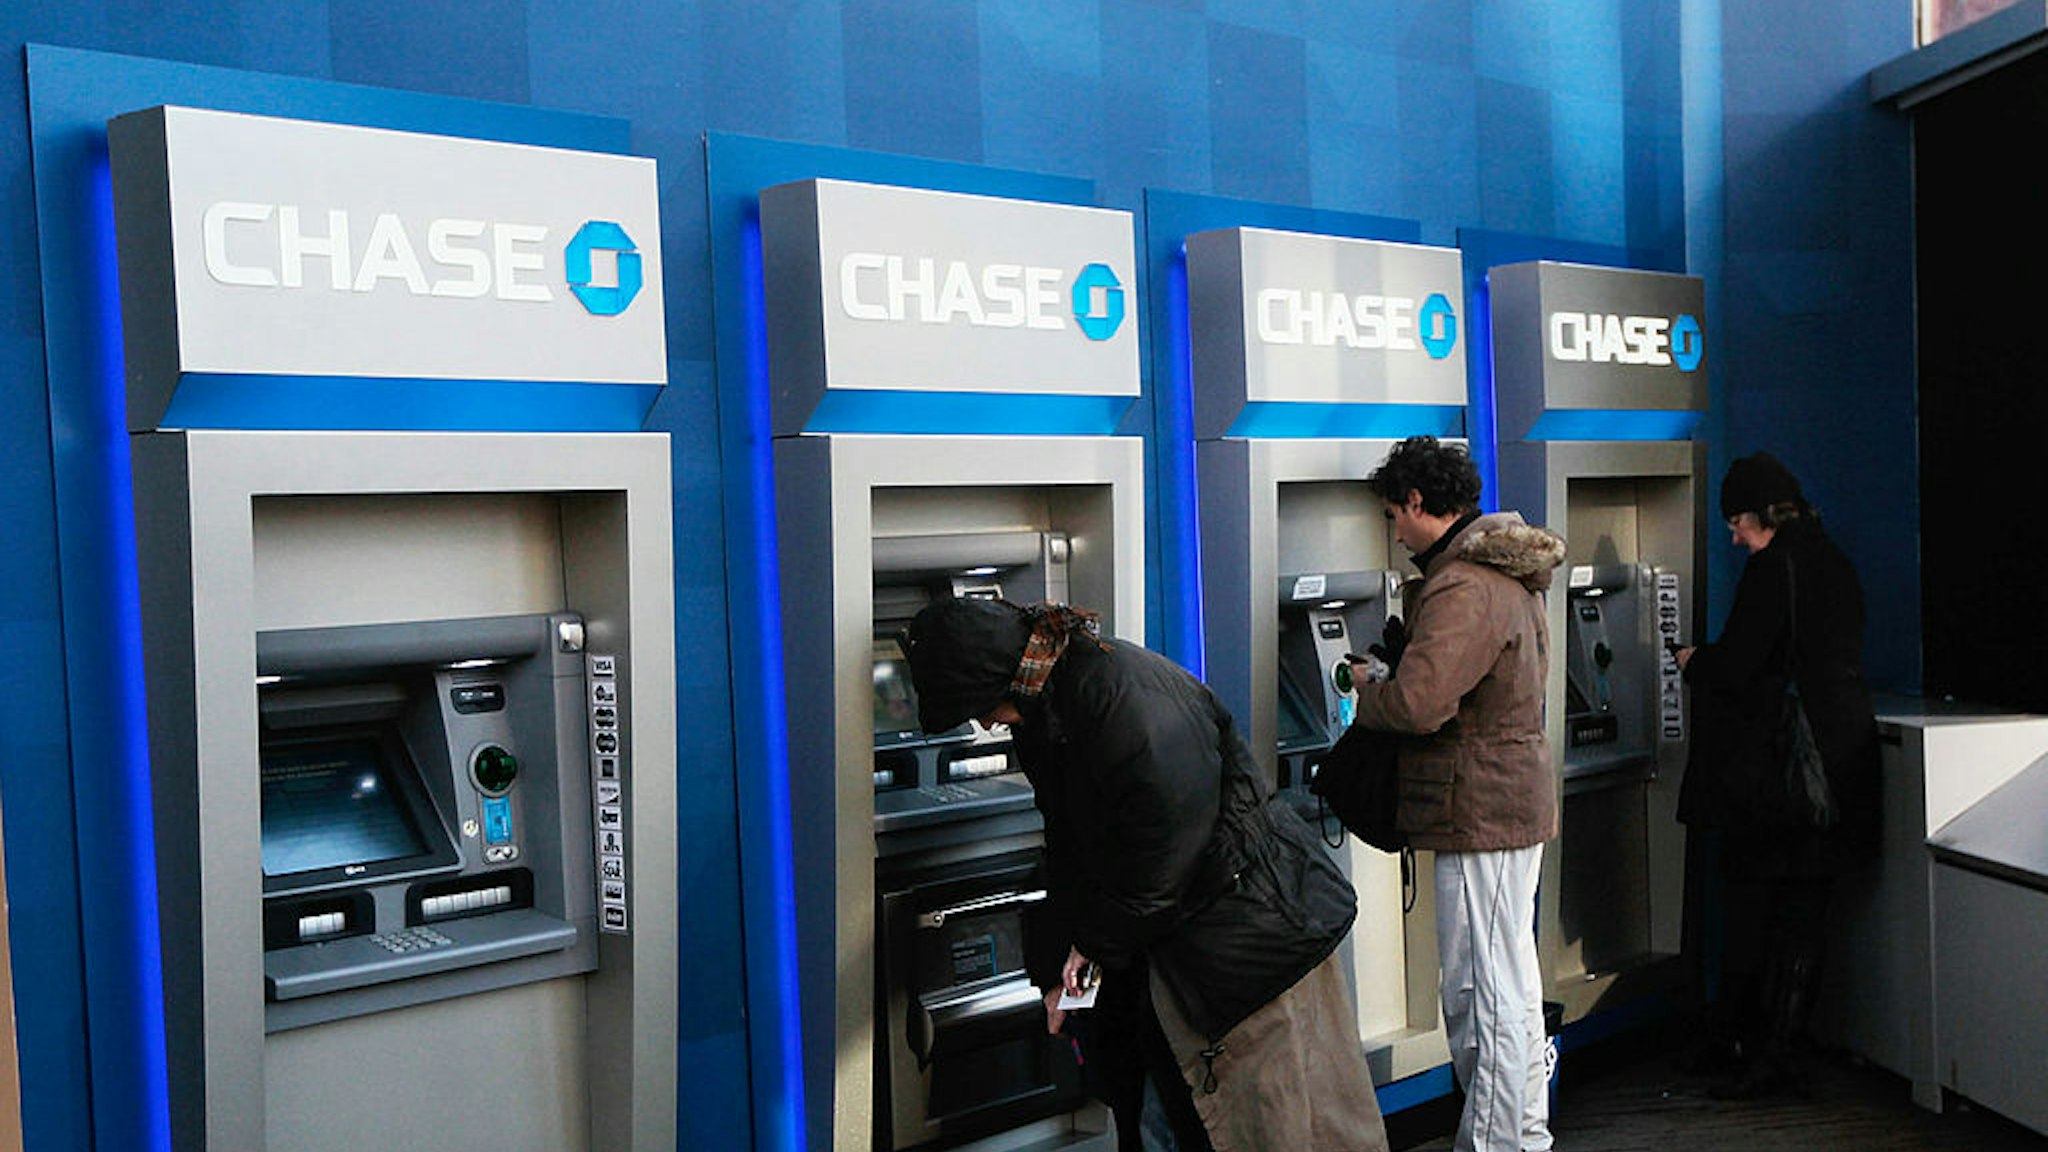 NEW YORK, NY - JANUARY 14: People use ATMs at a Chase branch bank January 14, 2011 in New York City. JPMorgan Chase, one of the nation's largest banks, reported $4.8 billion in income last quarter, a 47 percent jump, sending its stock higher.